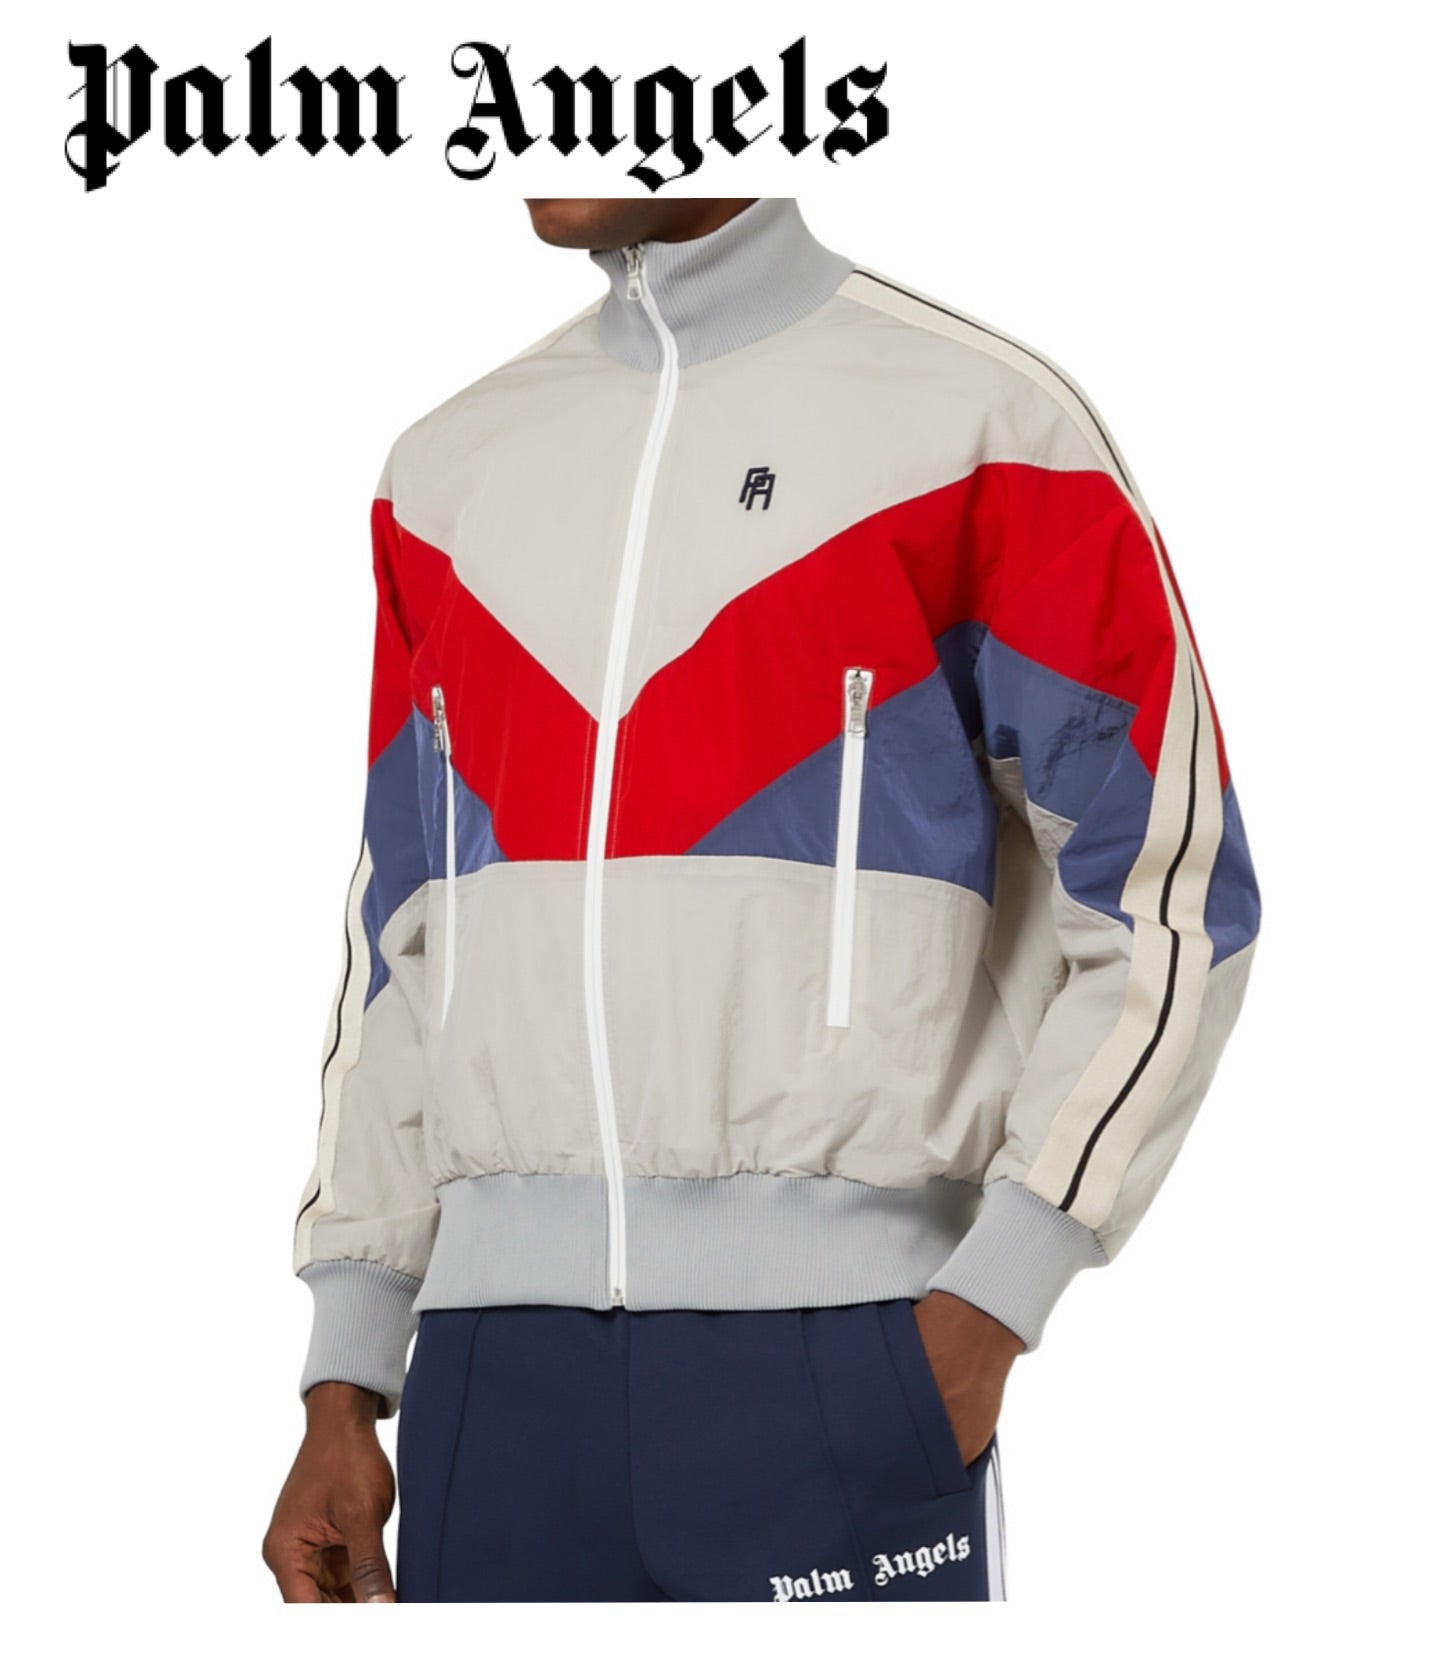 NWT PALM ANGELS COLOR BLOCK BOMBER JACKET GRAY WINDBREAKER LOGO-EMBROIDERED